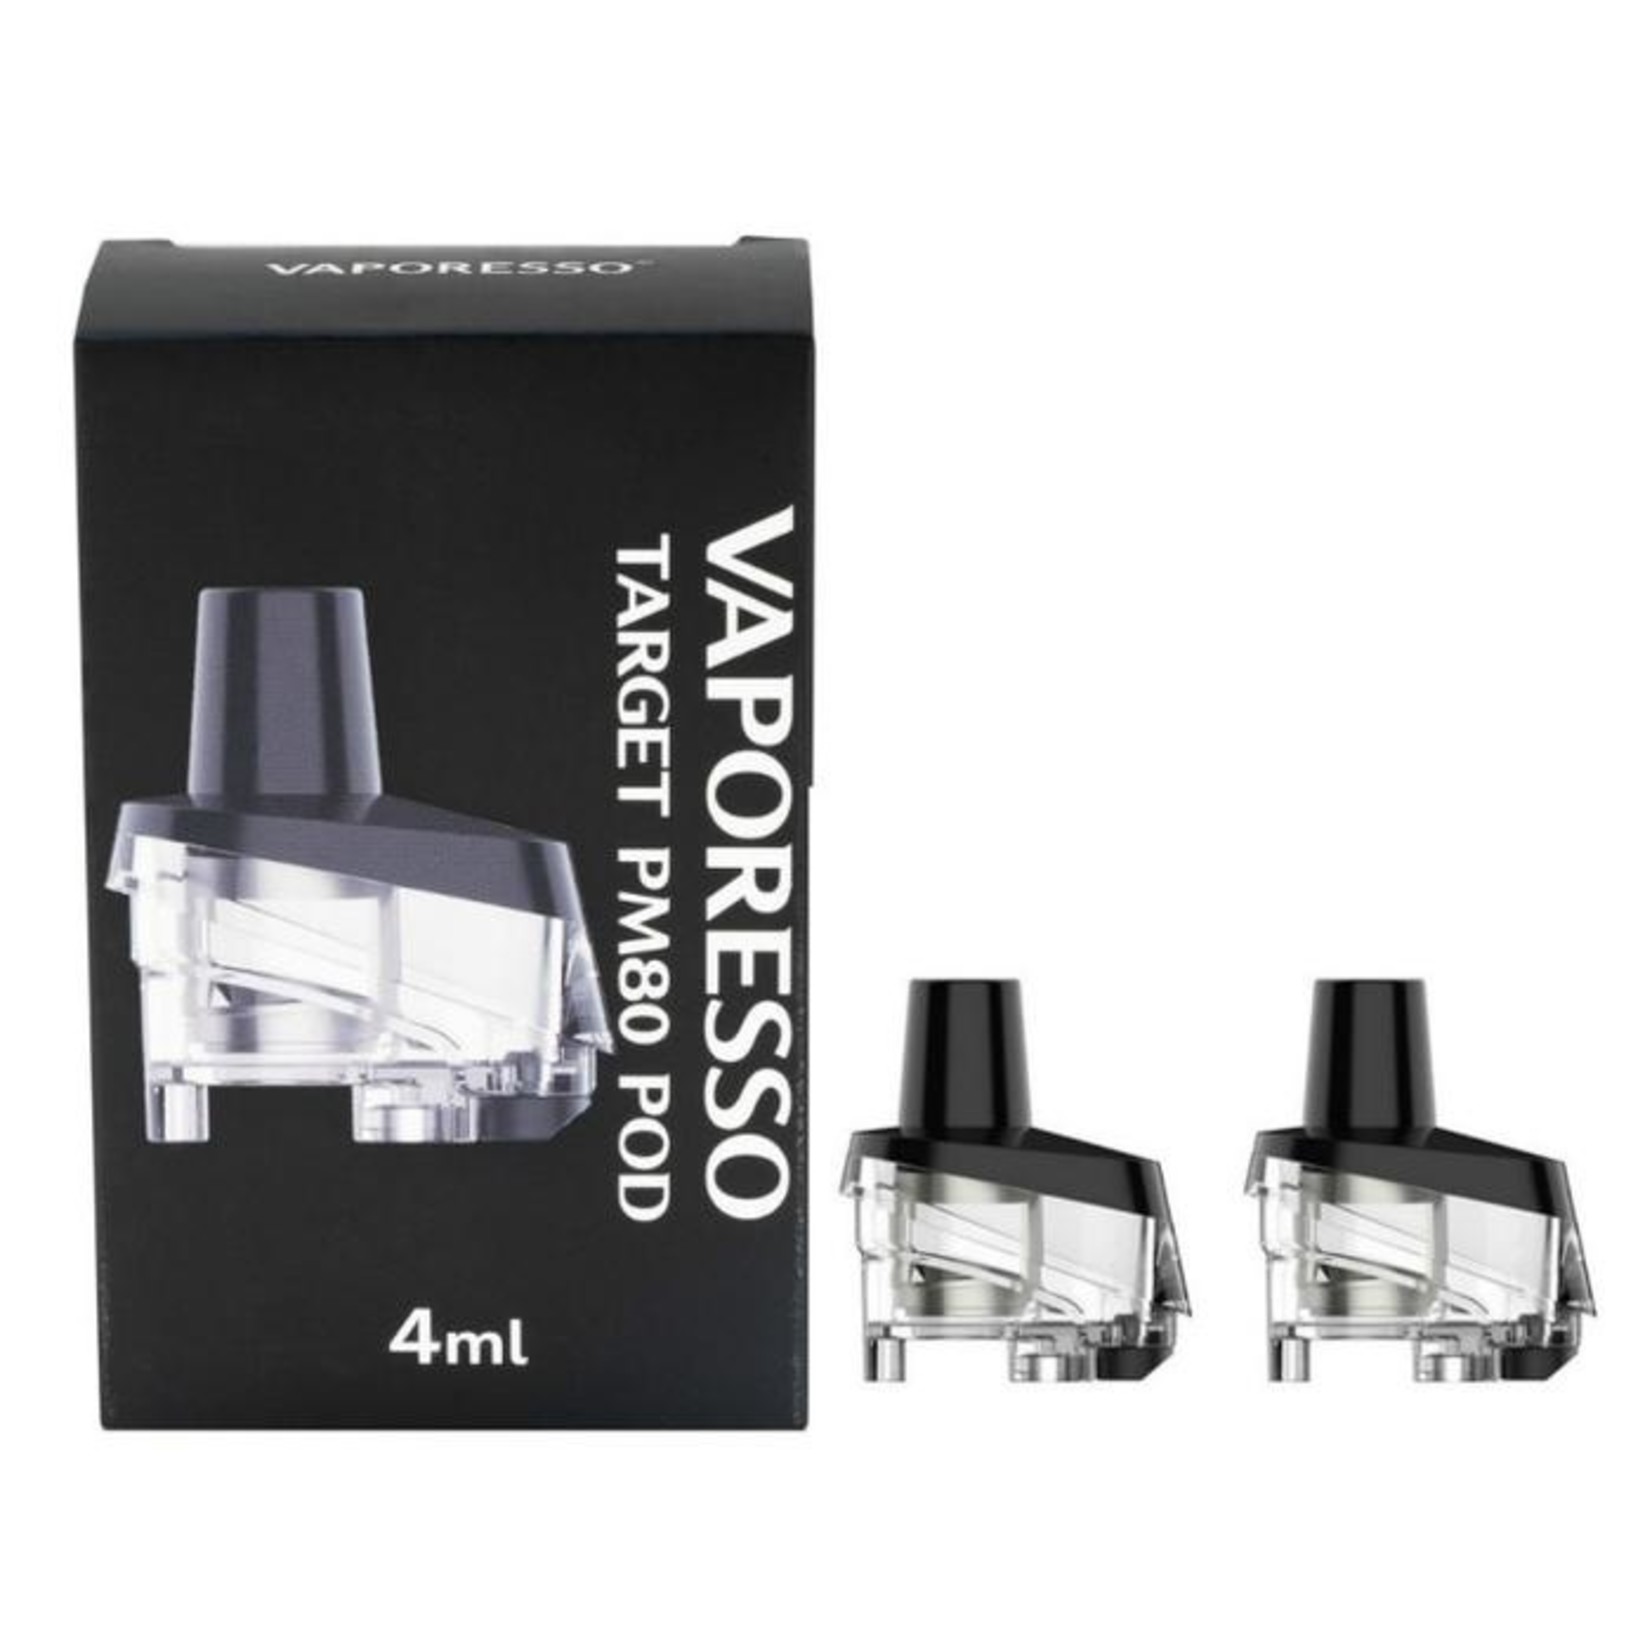 Vaporesso Target PM80 Replacement Pod (Box of 2)